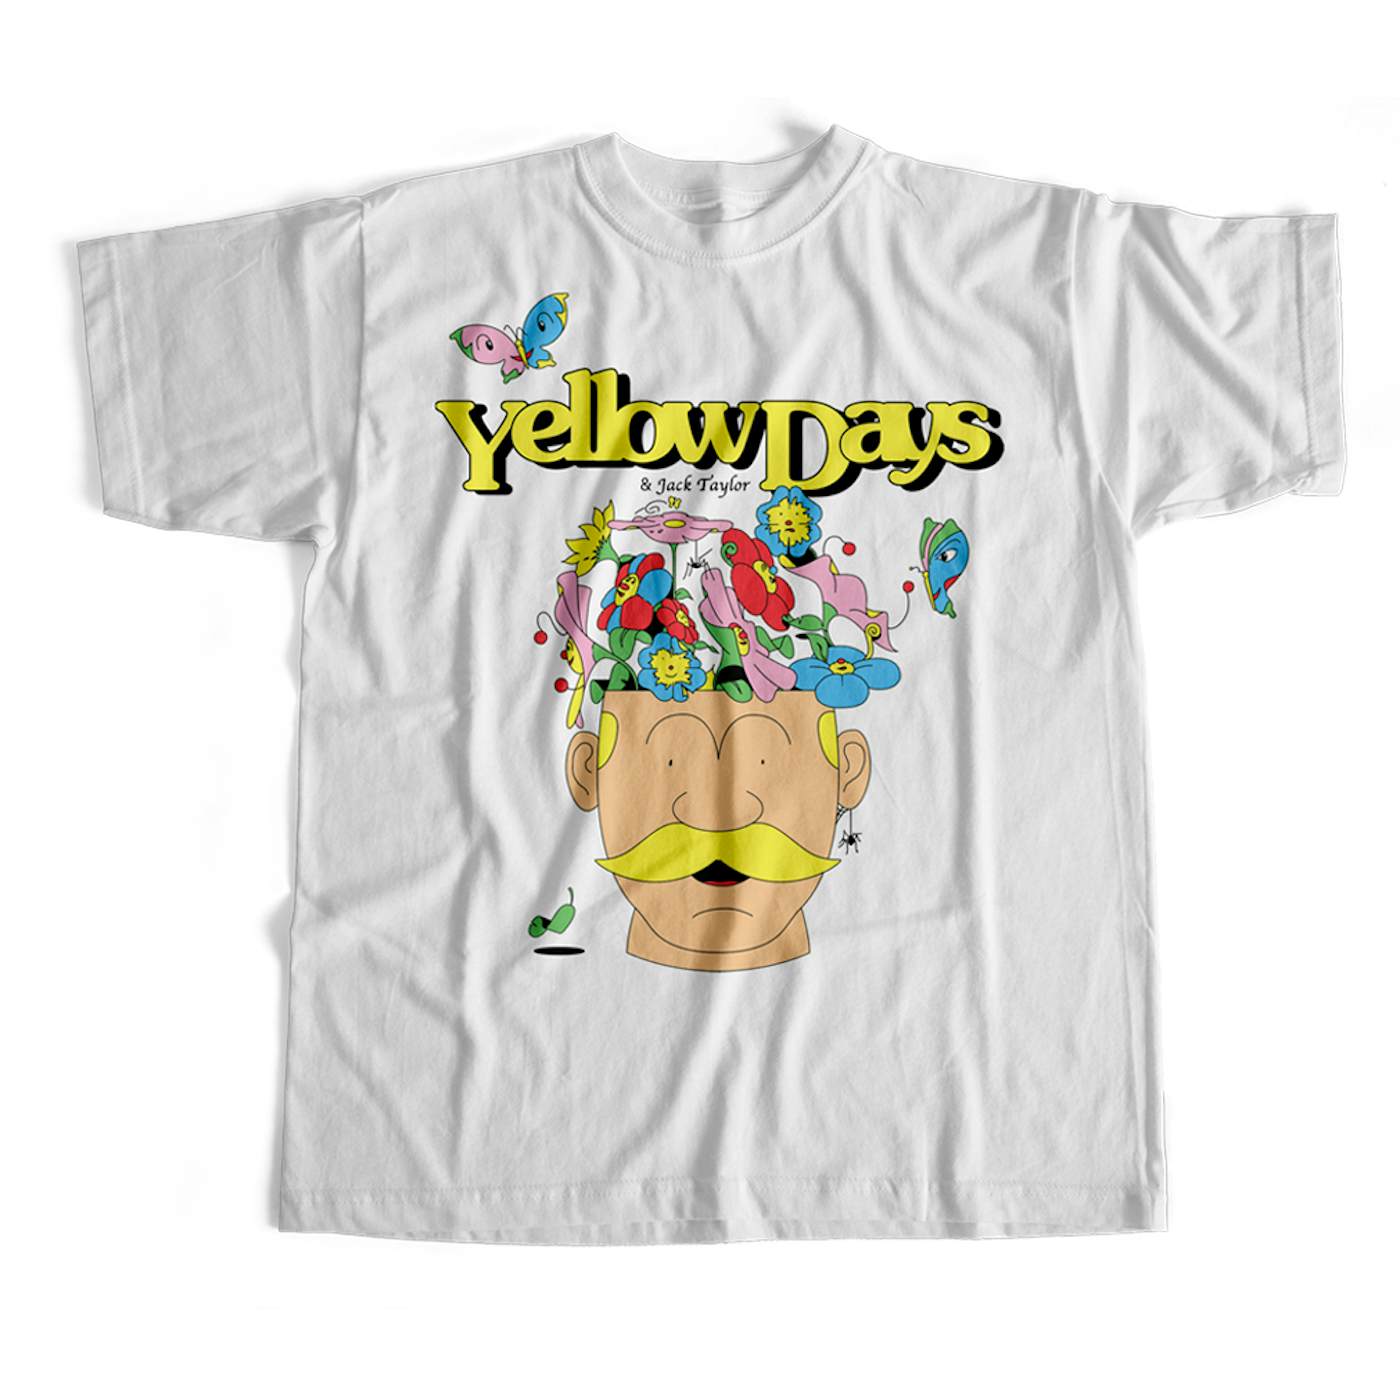 Yellow Days Getting Closer Tee X Jack Taylor